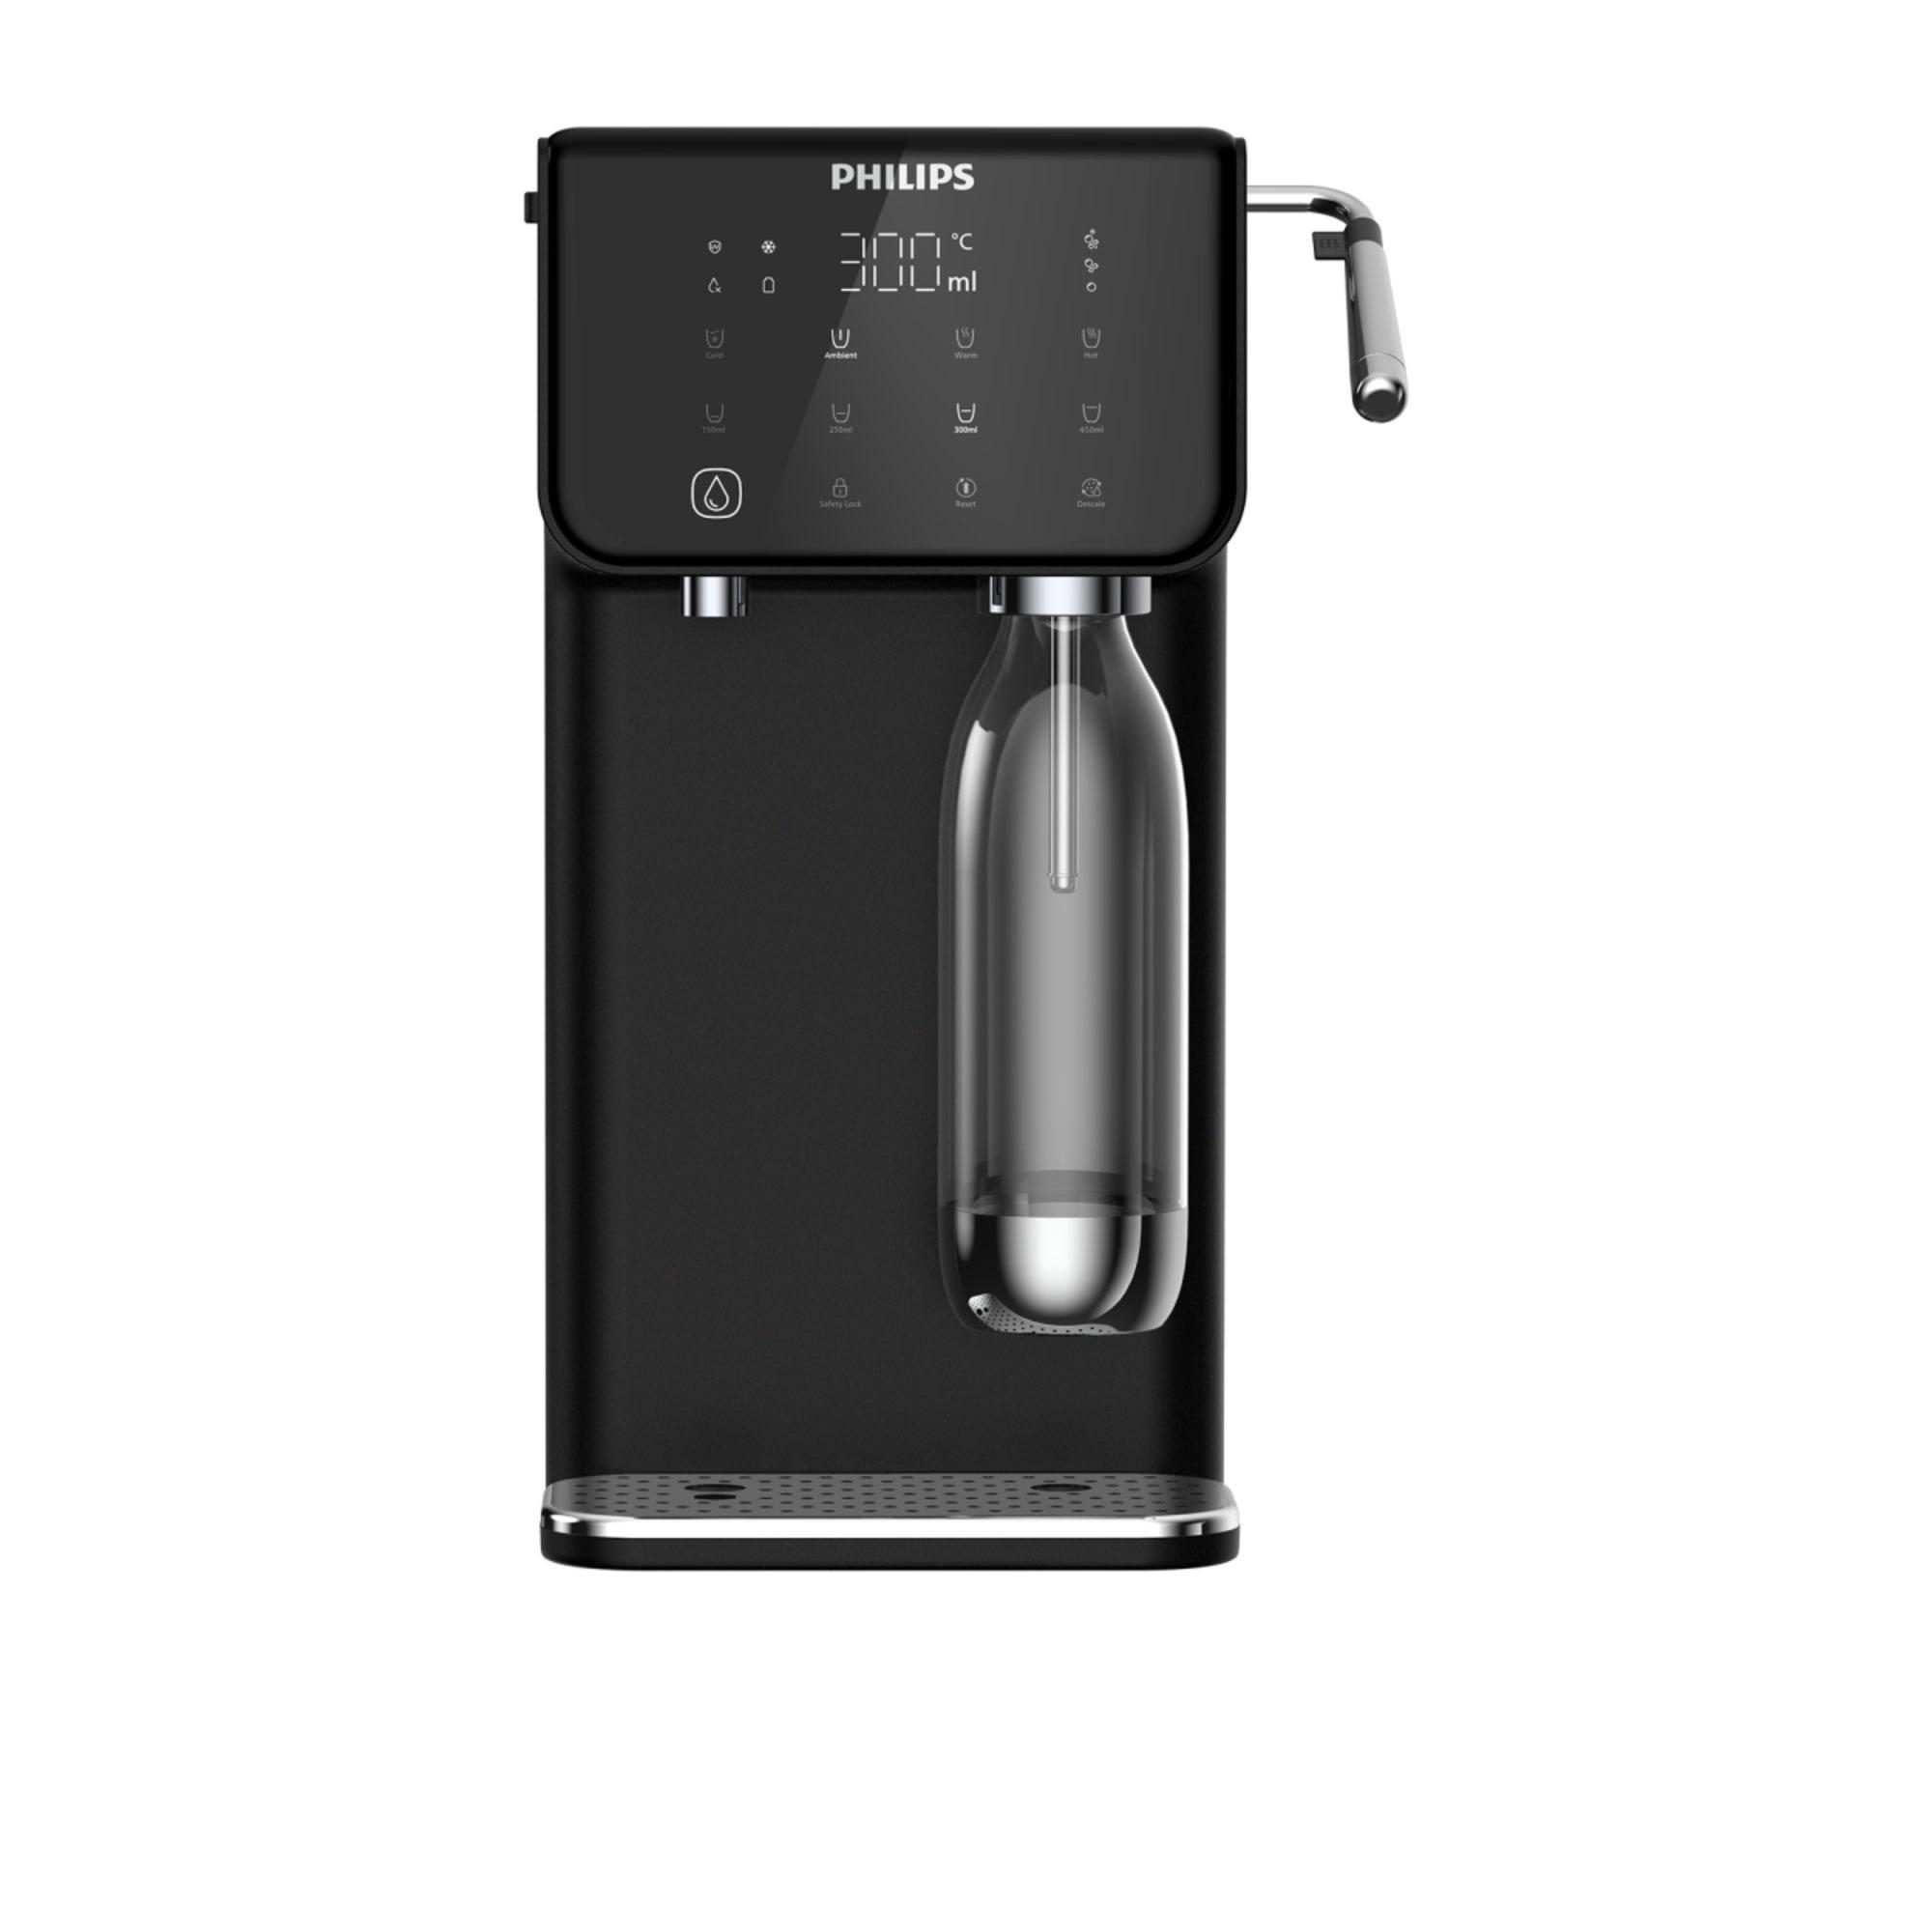 Philips Hot and Cold Sparkling Water Station with Micro X Clean Filtration 3.8L Image 8